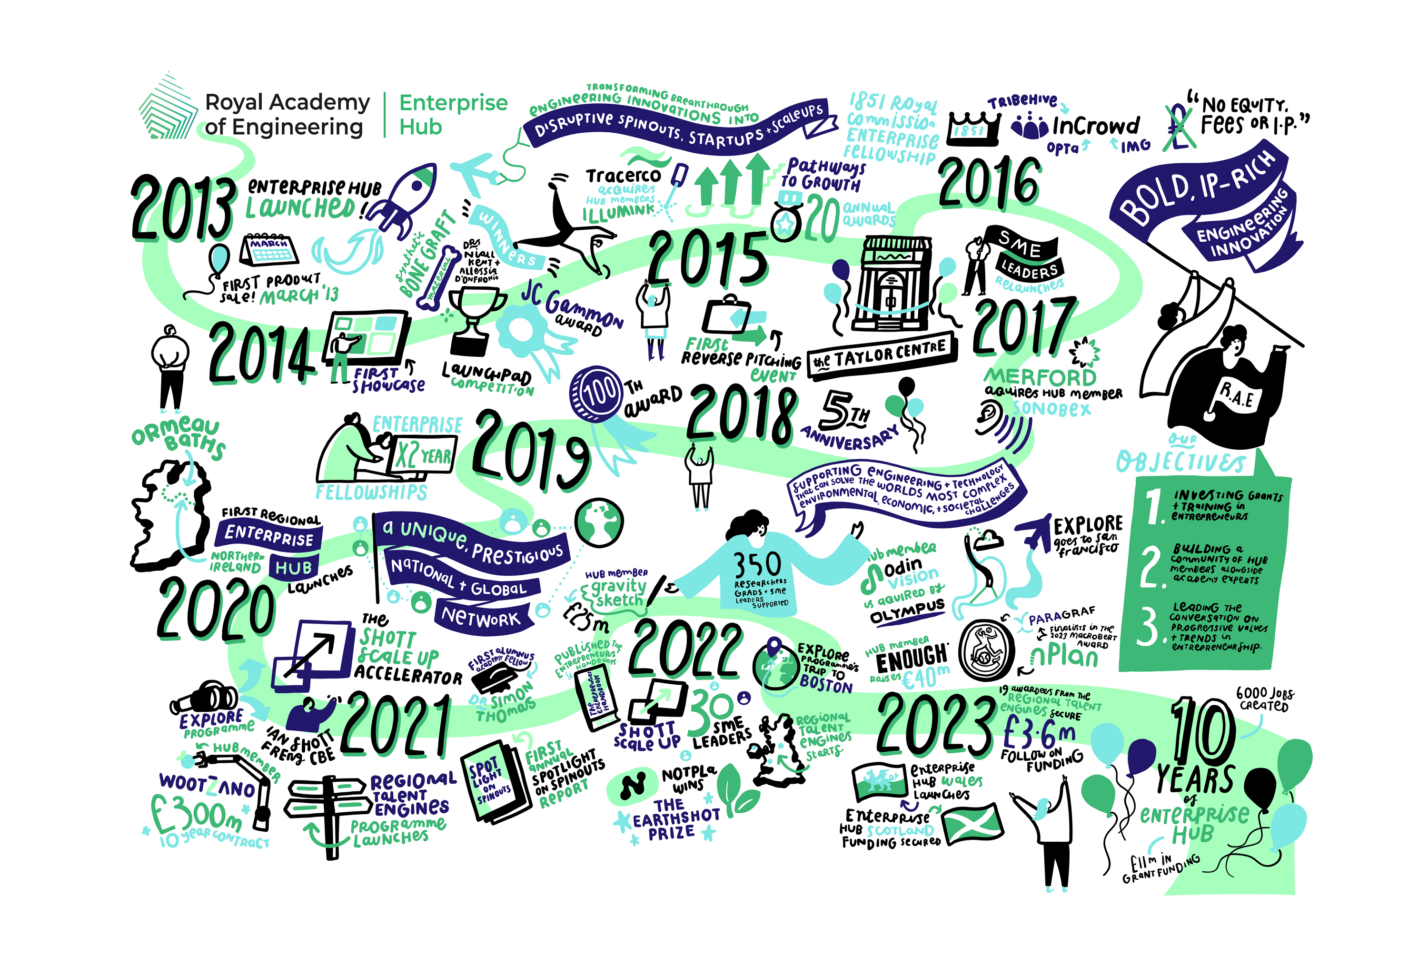 Illustrated timeline mural by Smartup Visuals